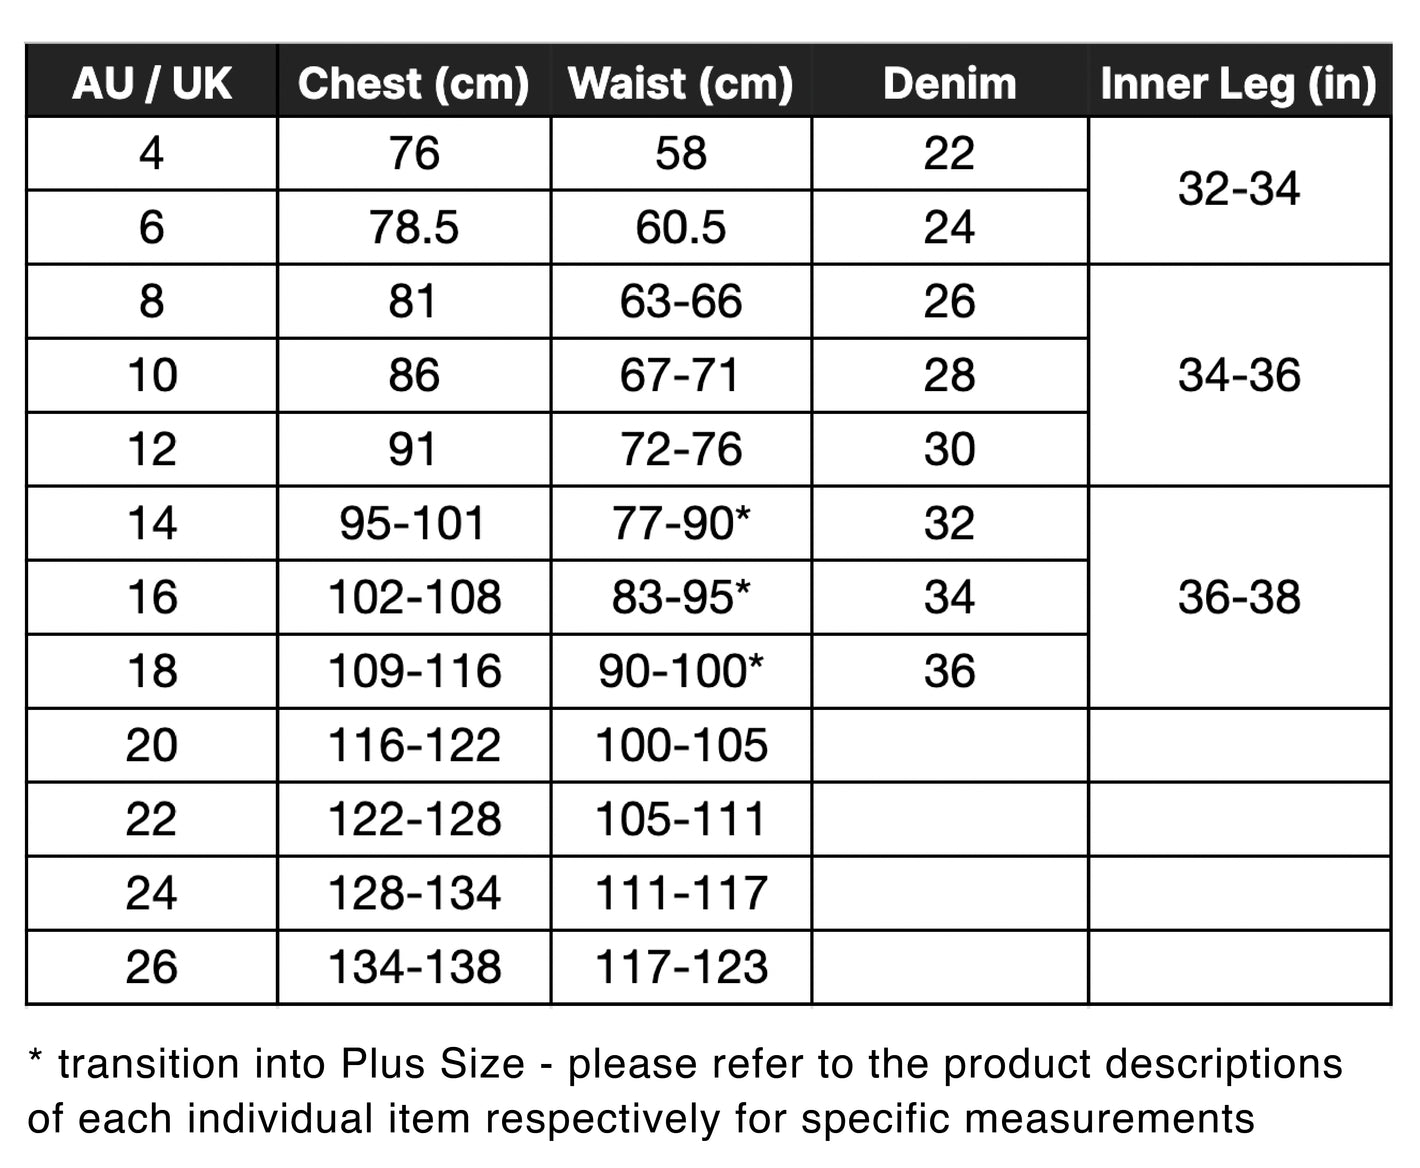 The Ultimate Guide to Women's Clothing Size Conversion: US to